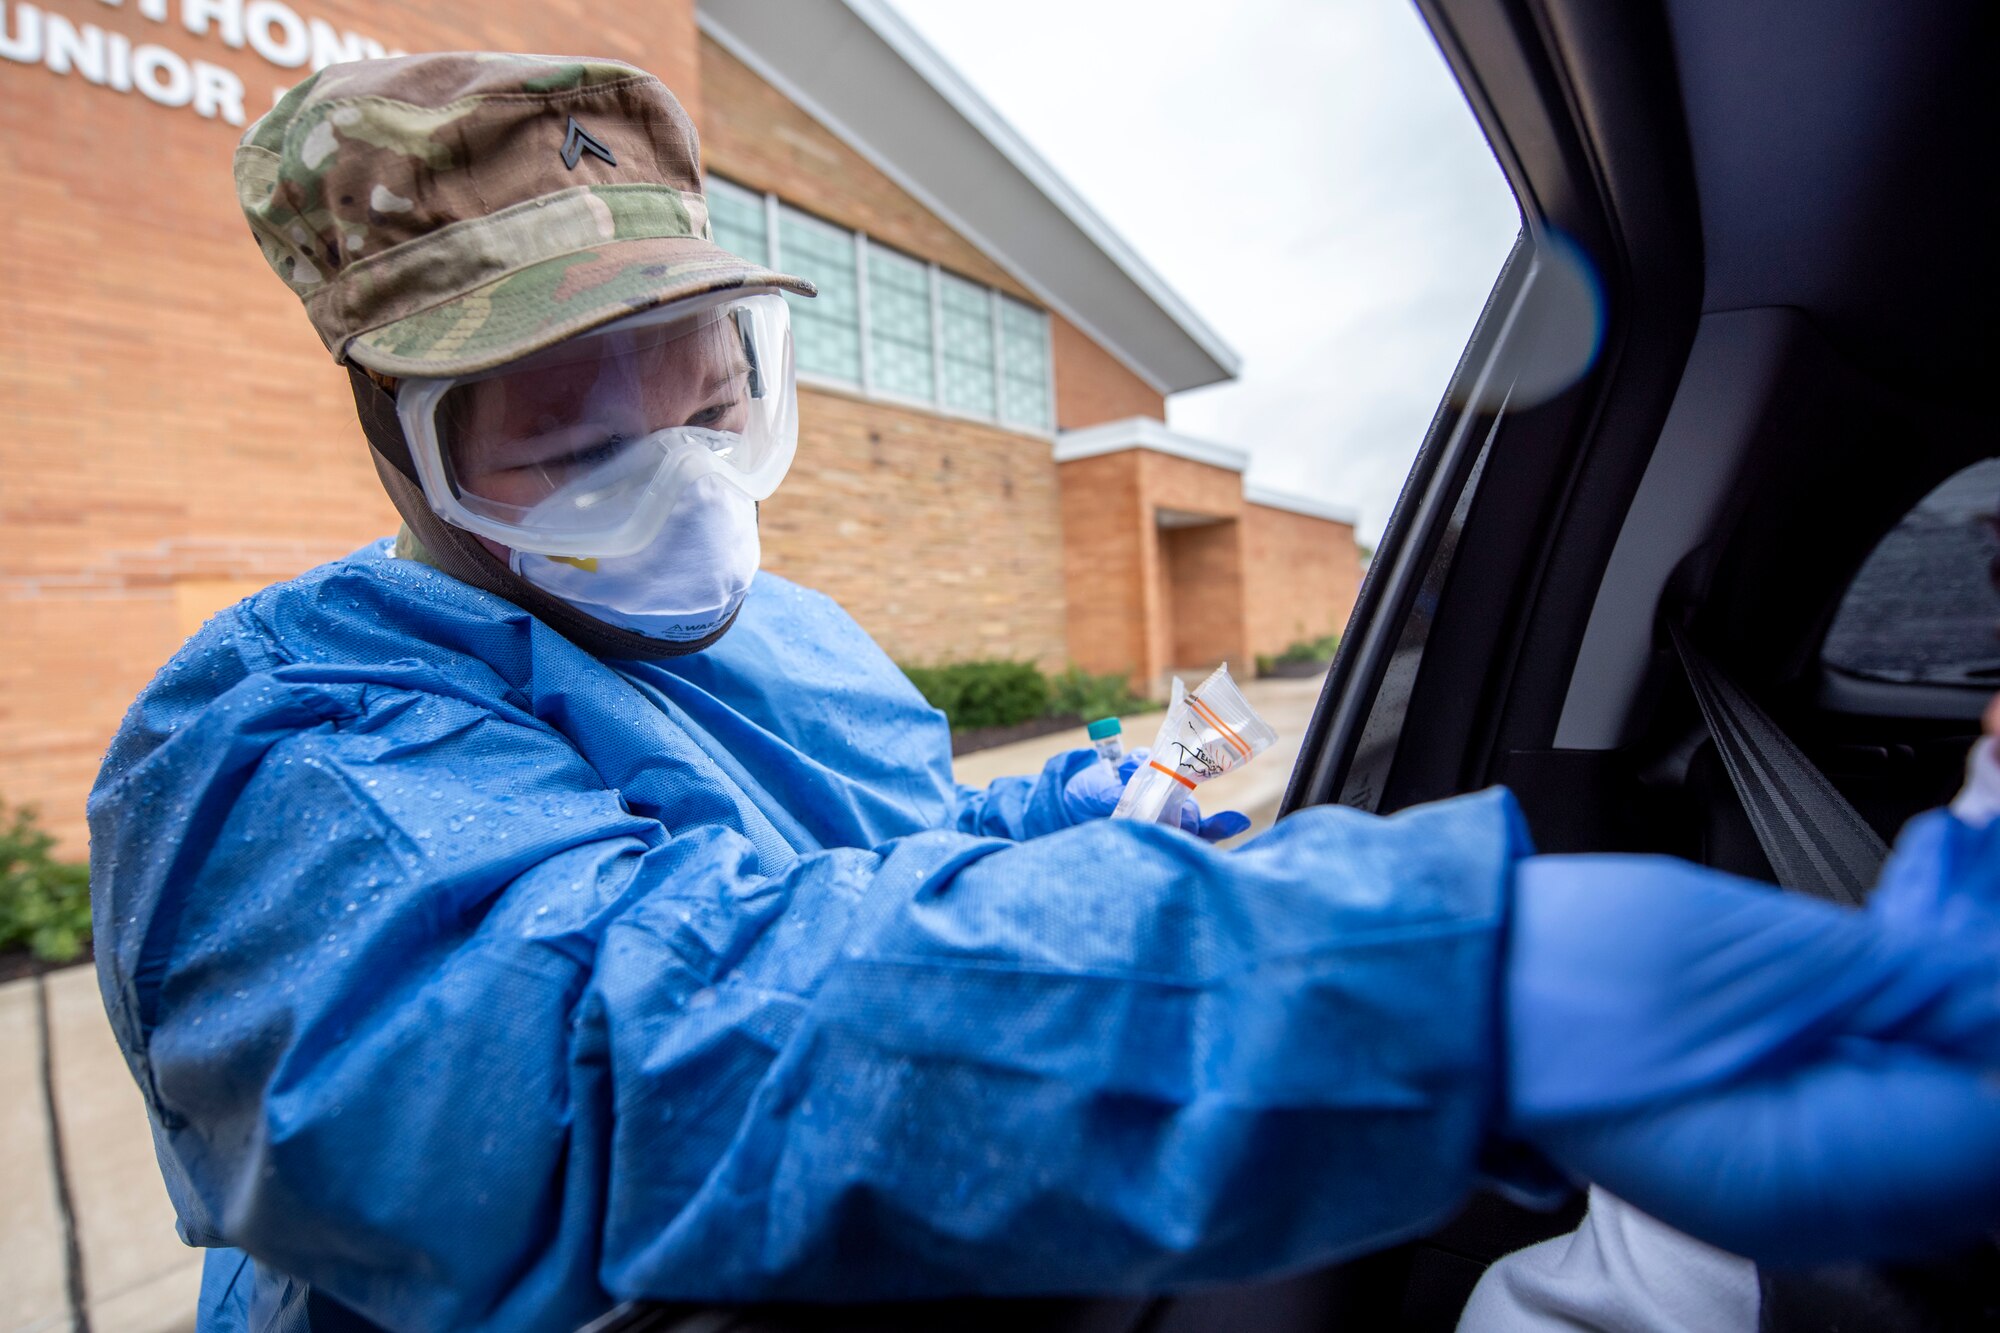 Cpl. Nikki Sherman, a Soldier assigned to the Ohio Military Reserve, conducts a COVID-19 test during a pop-up testing drive-thru at Anthony Wayne Junior High School in Whitehouse, Ohio, Oct. 19, 2020.